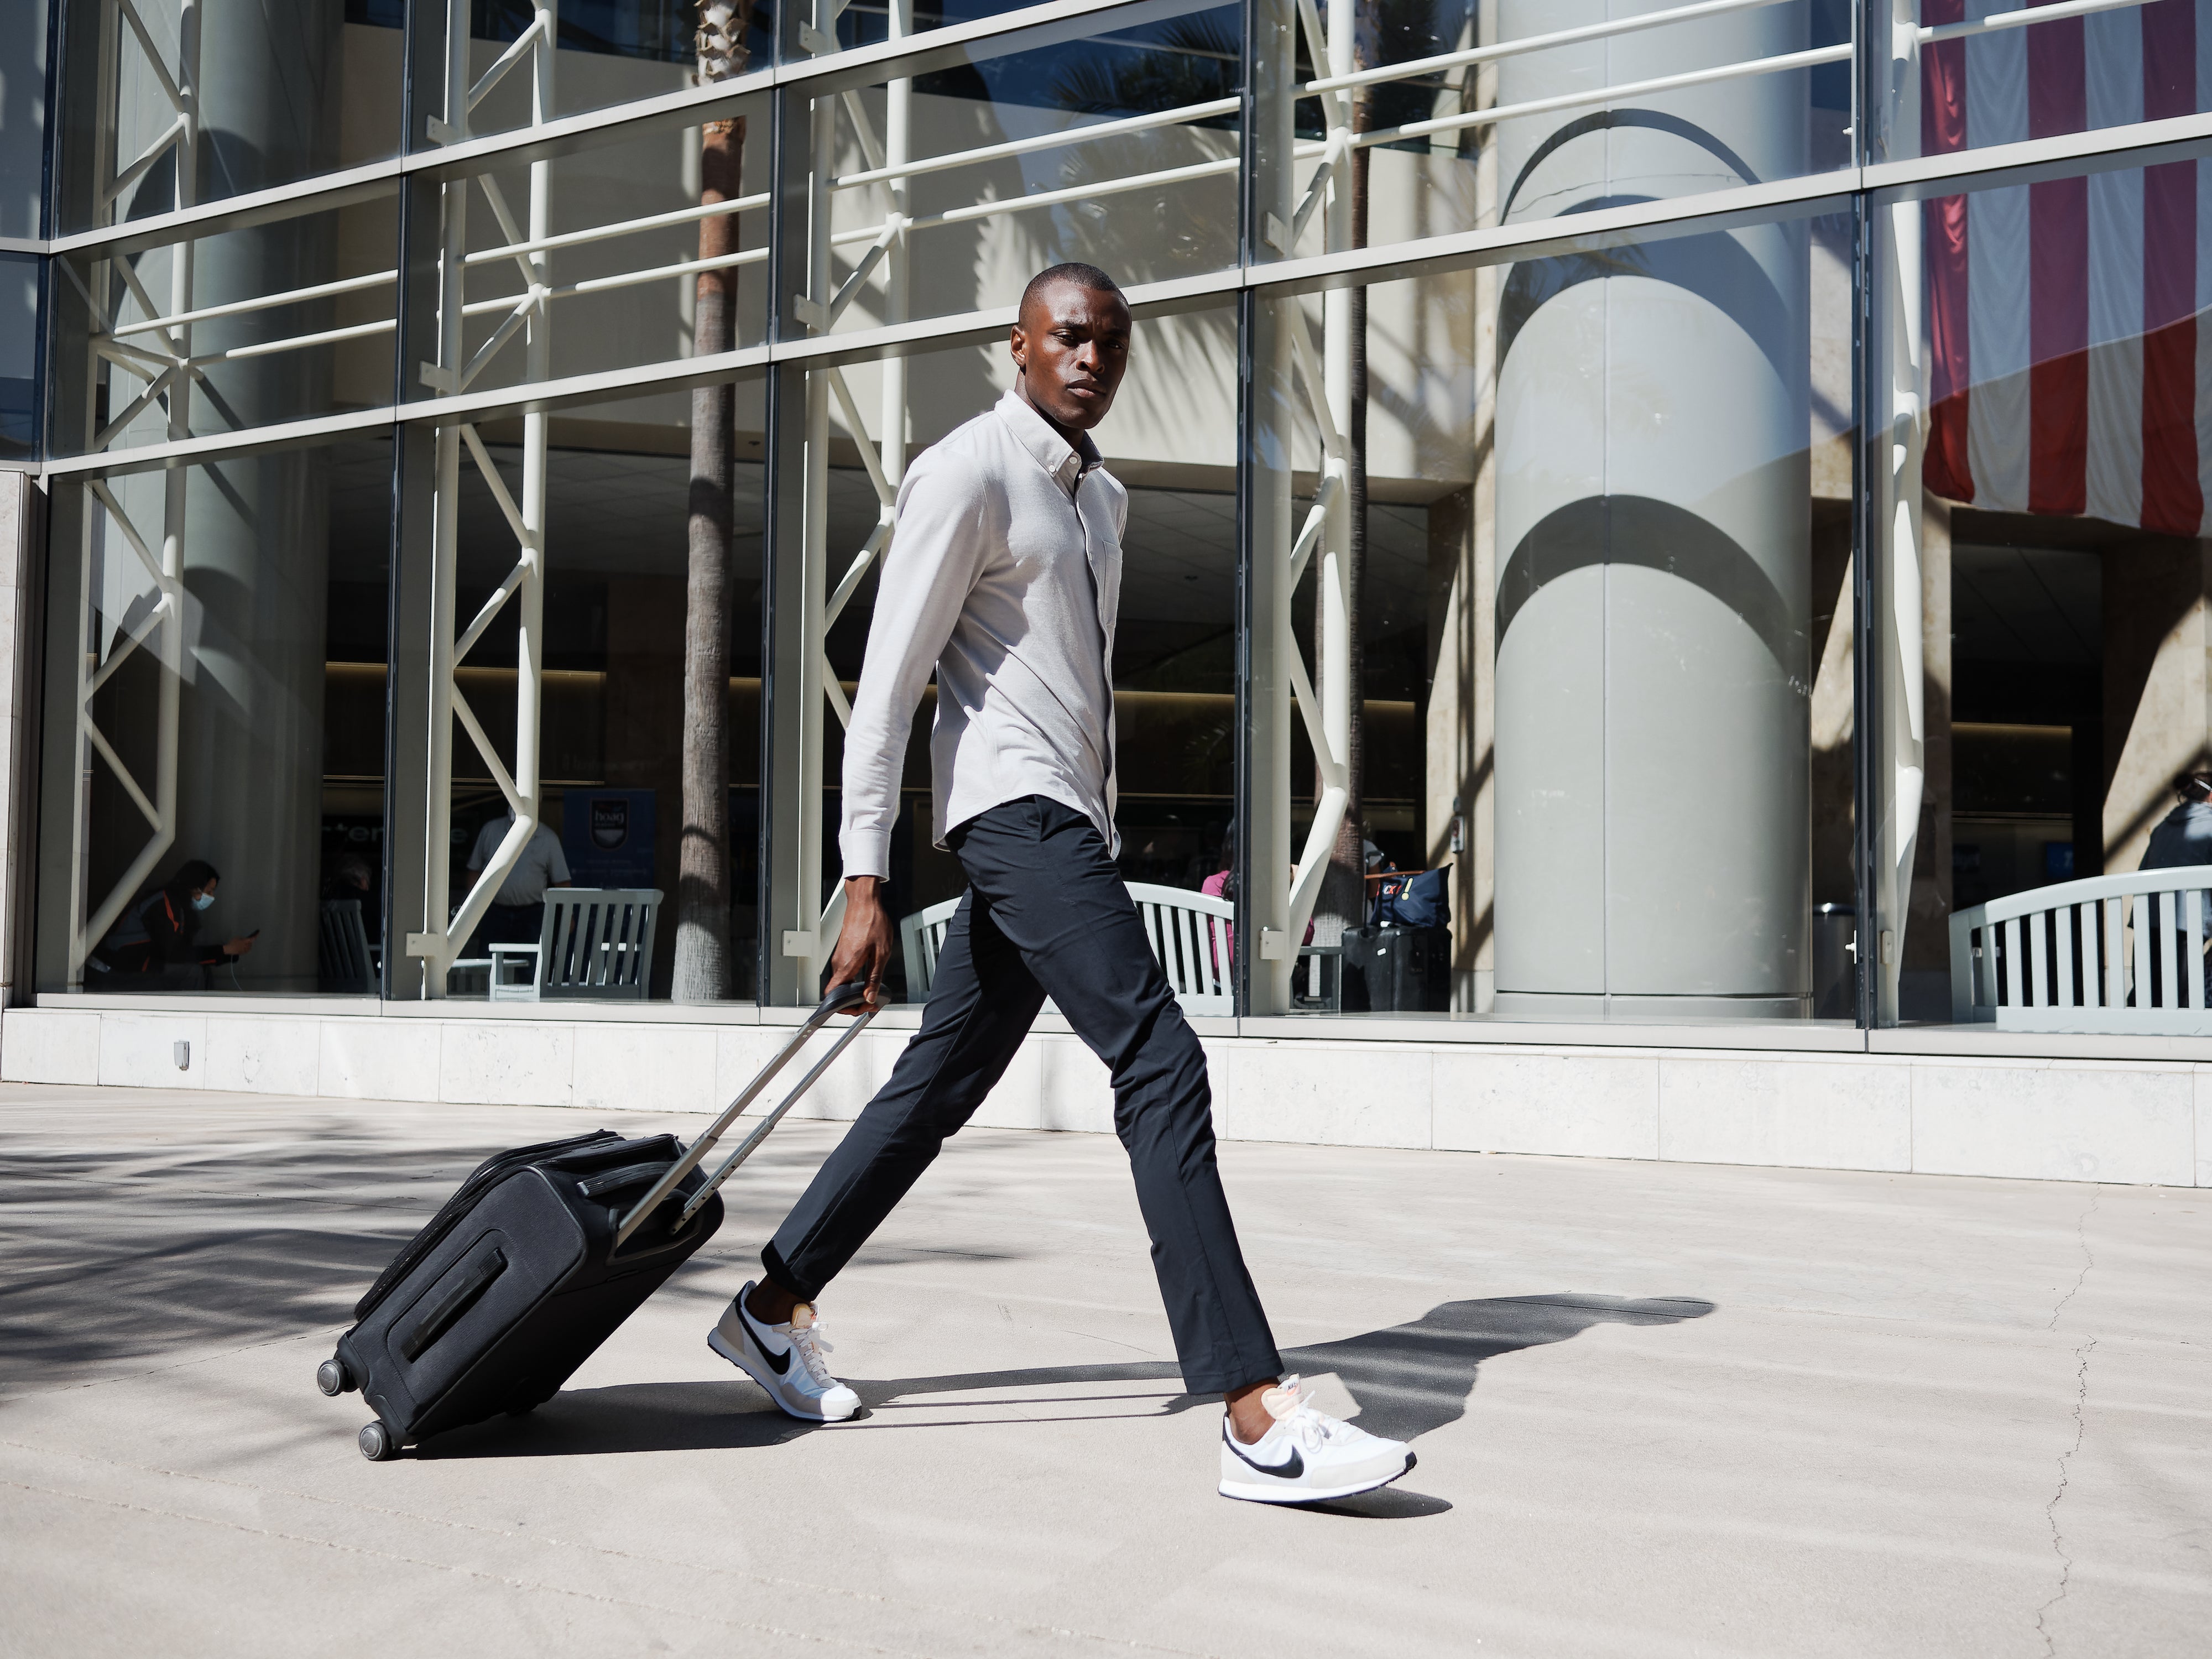 5 Best Wrinkle-Free Travel Clothes To Pack With You on Your Next